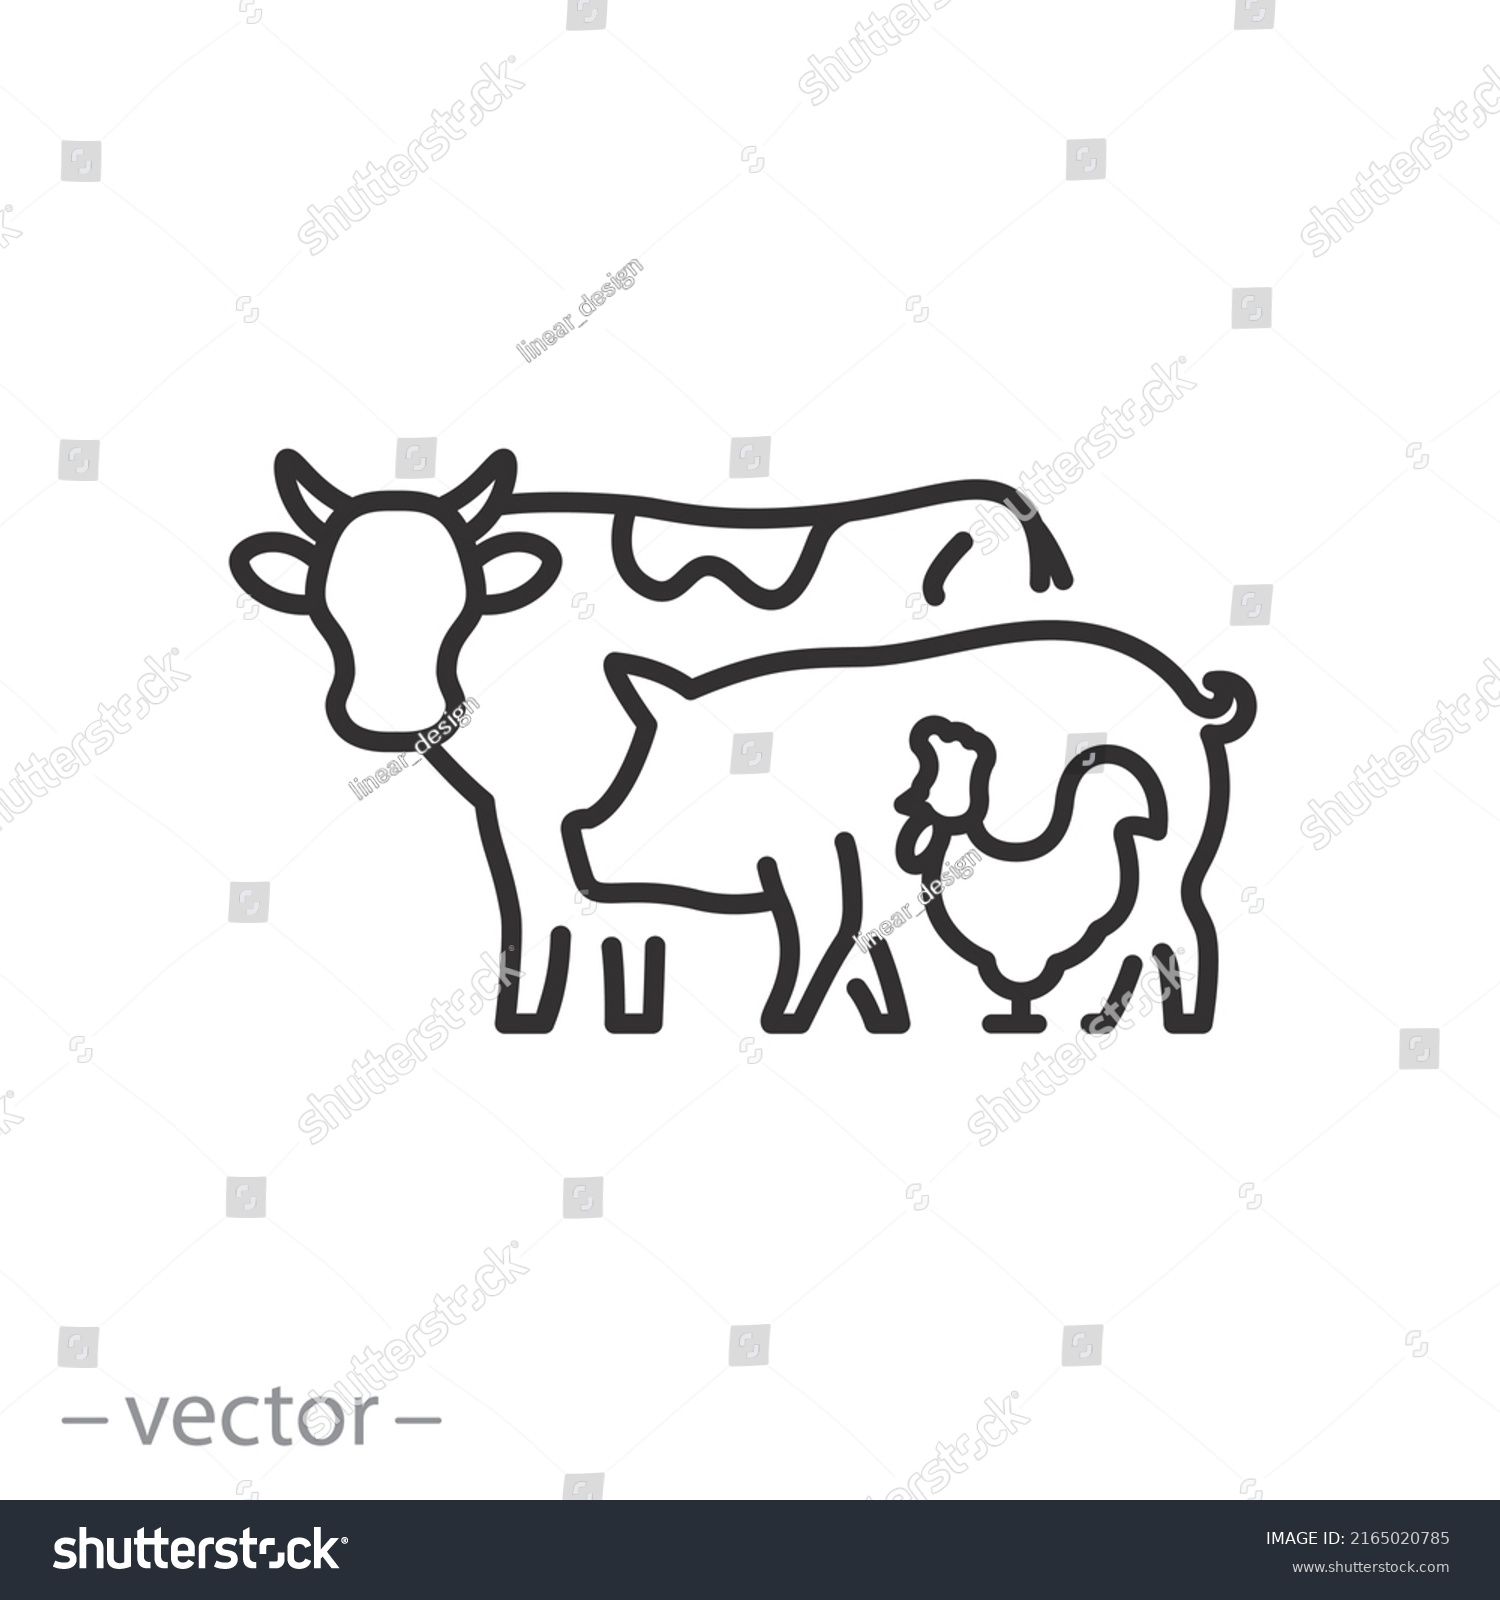 SVG of farm animals icon, cow, pig and chicken, group of pets, thin line symbol on white background - editable stroke vector illustration svg